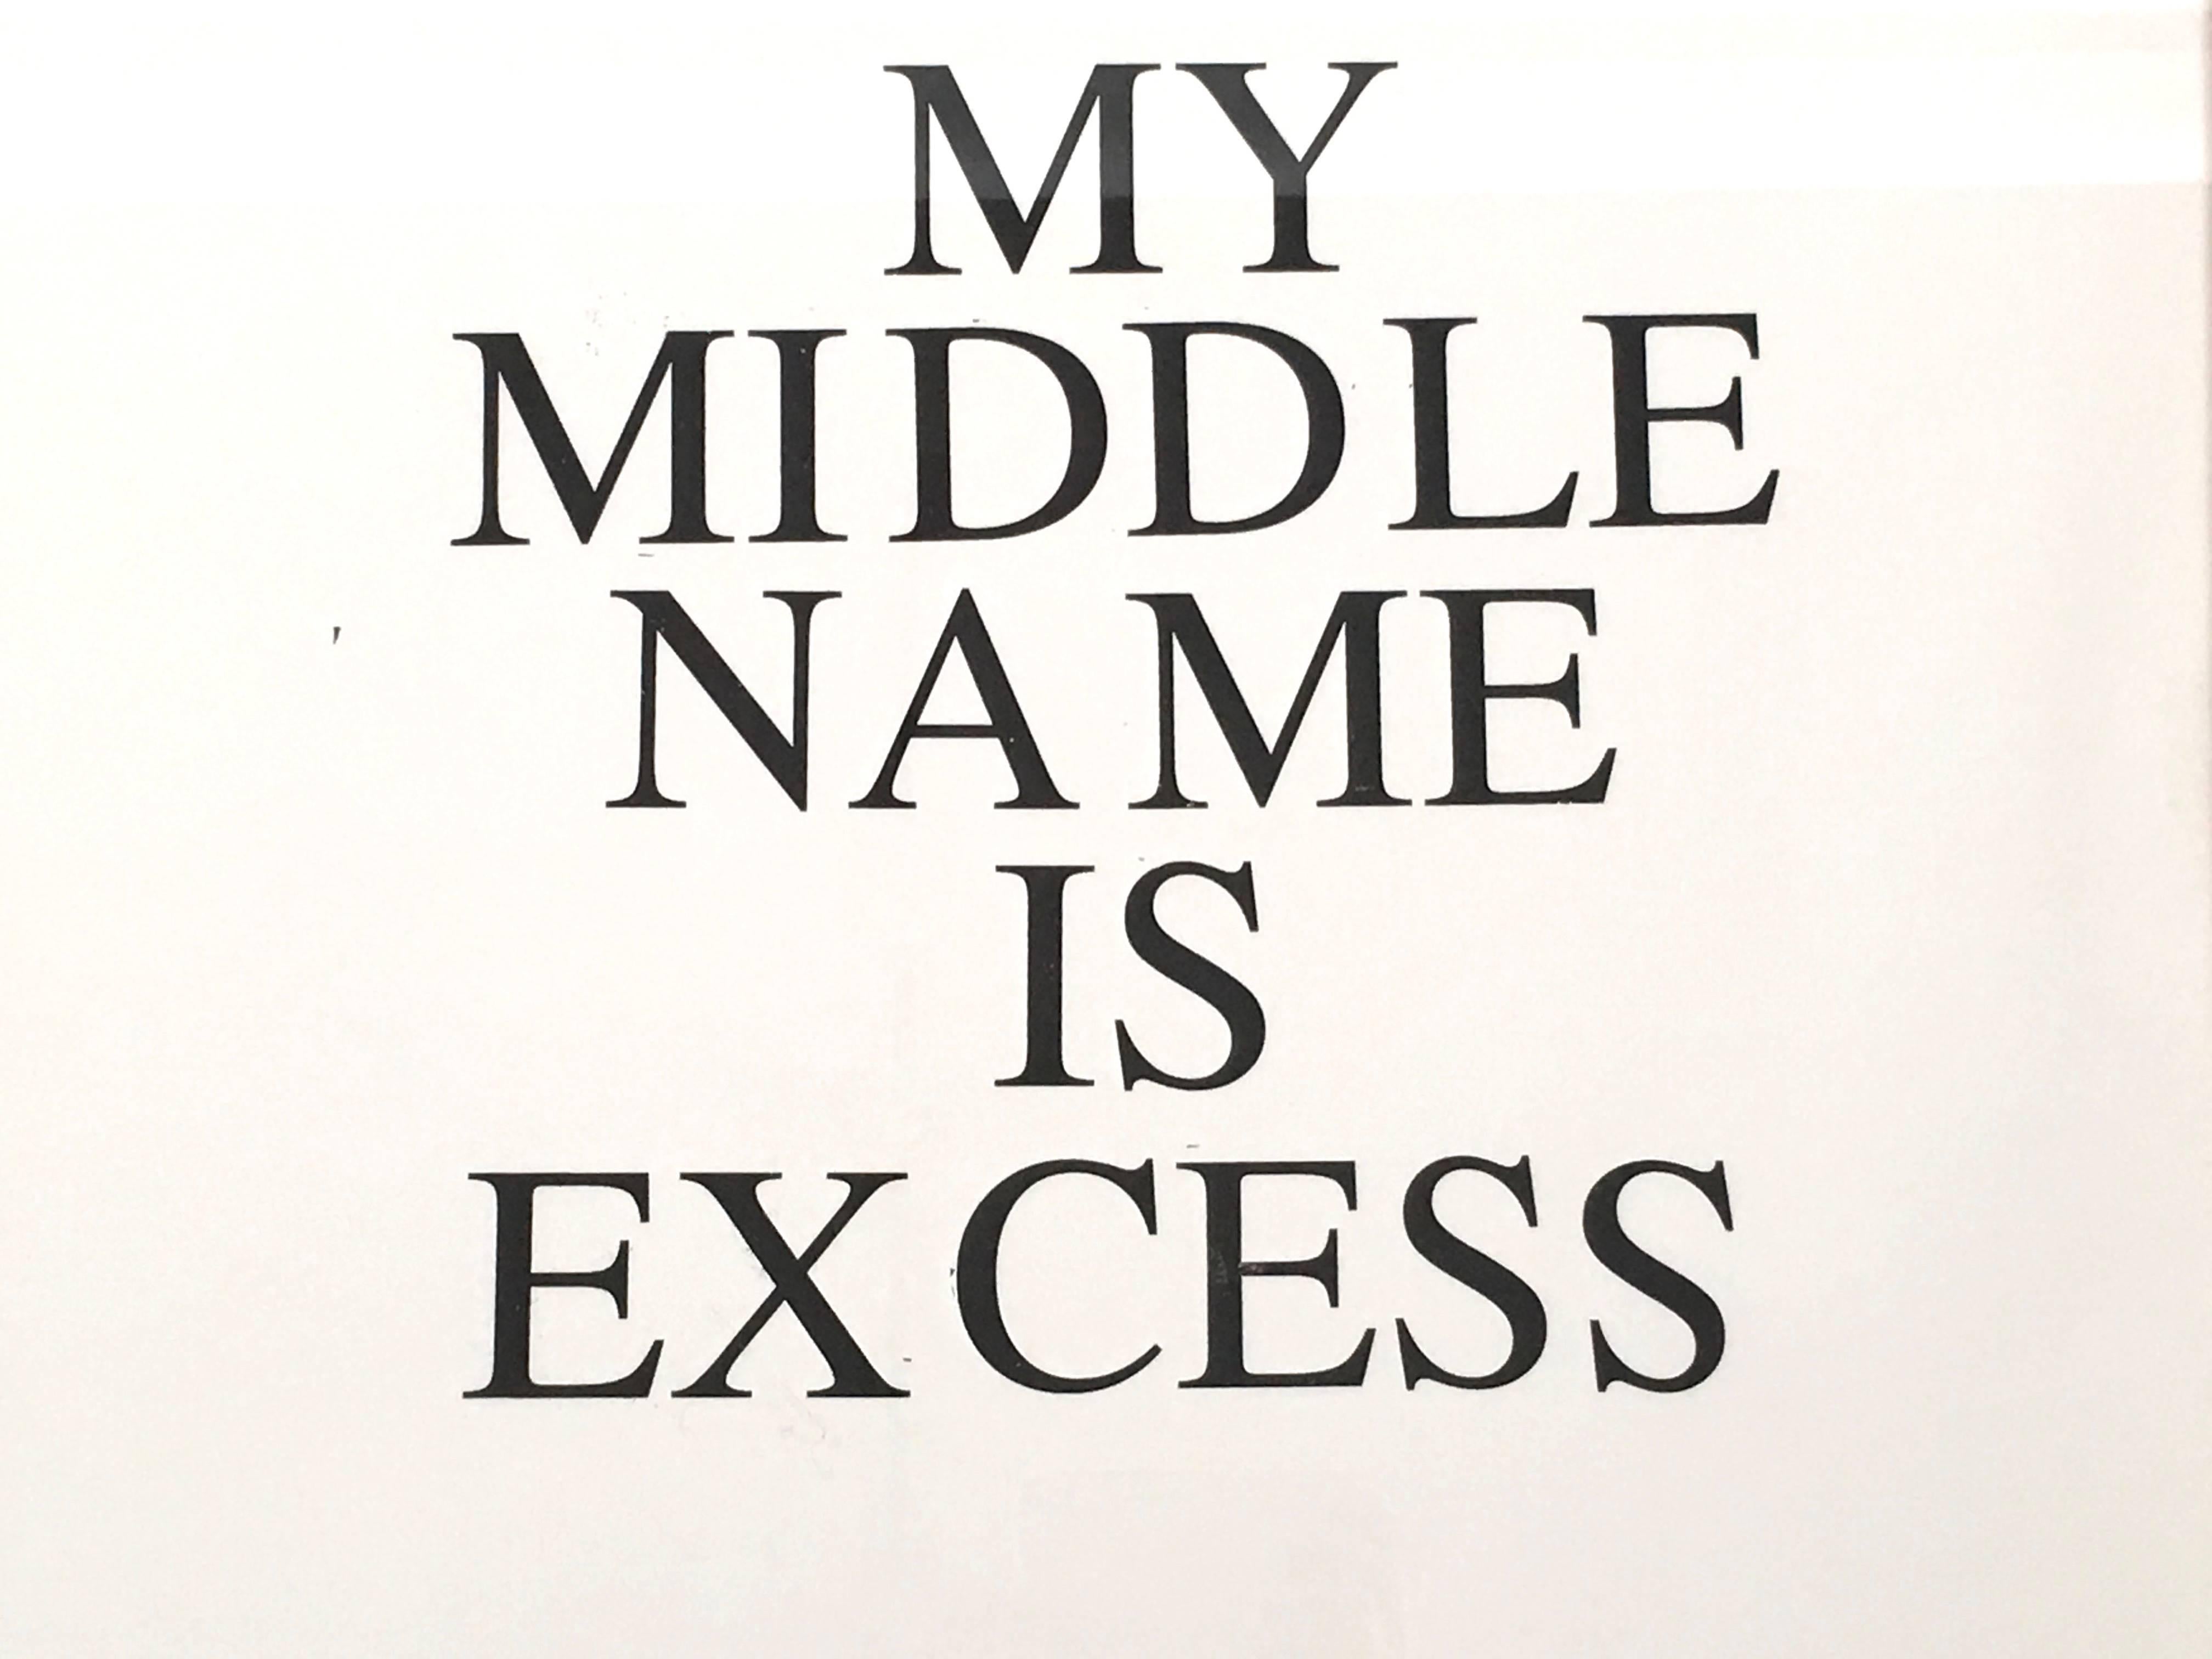 A graphic print by artist Jeffrey Teuton, with hand printed large typeface reading 'My Middle Name is Excess', number 1 of an edition of 5 . Signed lower right. Framed in high quality custom-made burnt orange lacquered wood frame with UV-resistant